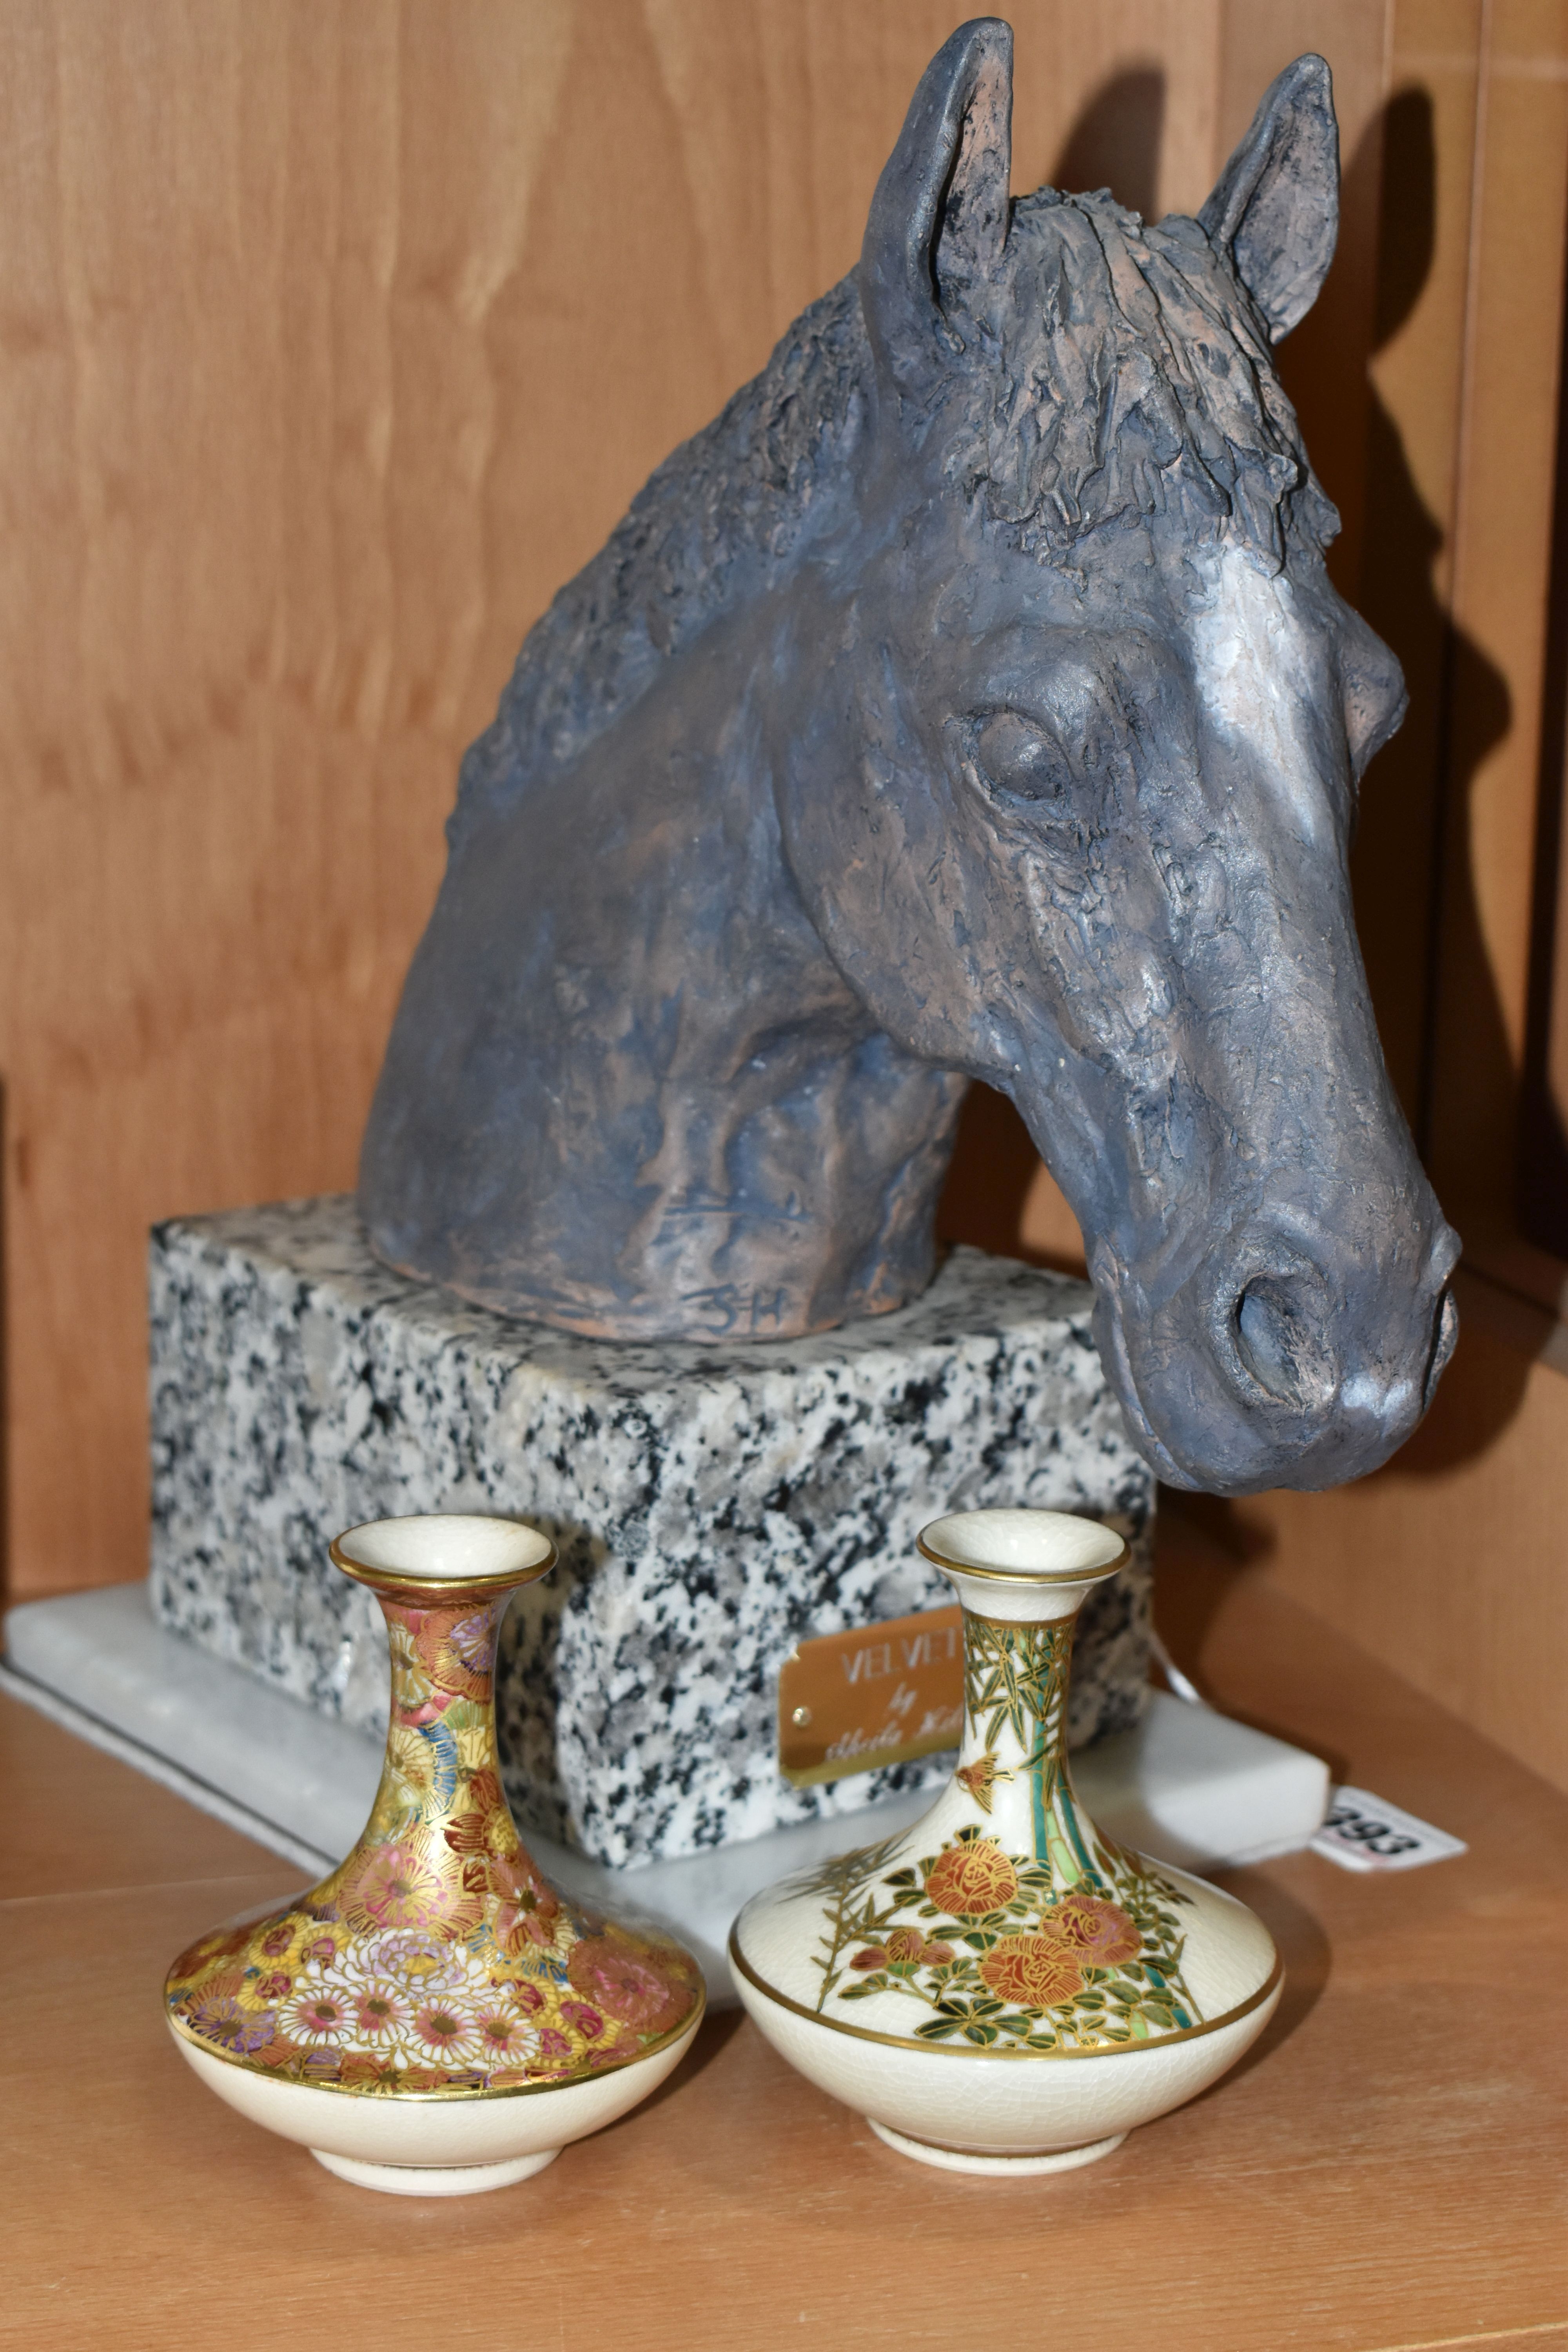 A SCULPTURE OF A HORSE AND TWO SATSUMA VASES, comprising a ceramic sculpture of a horse's head and